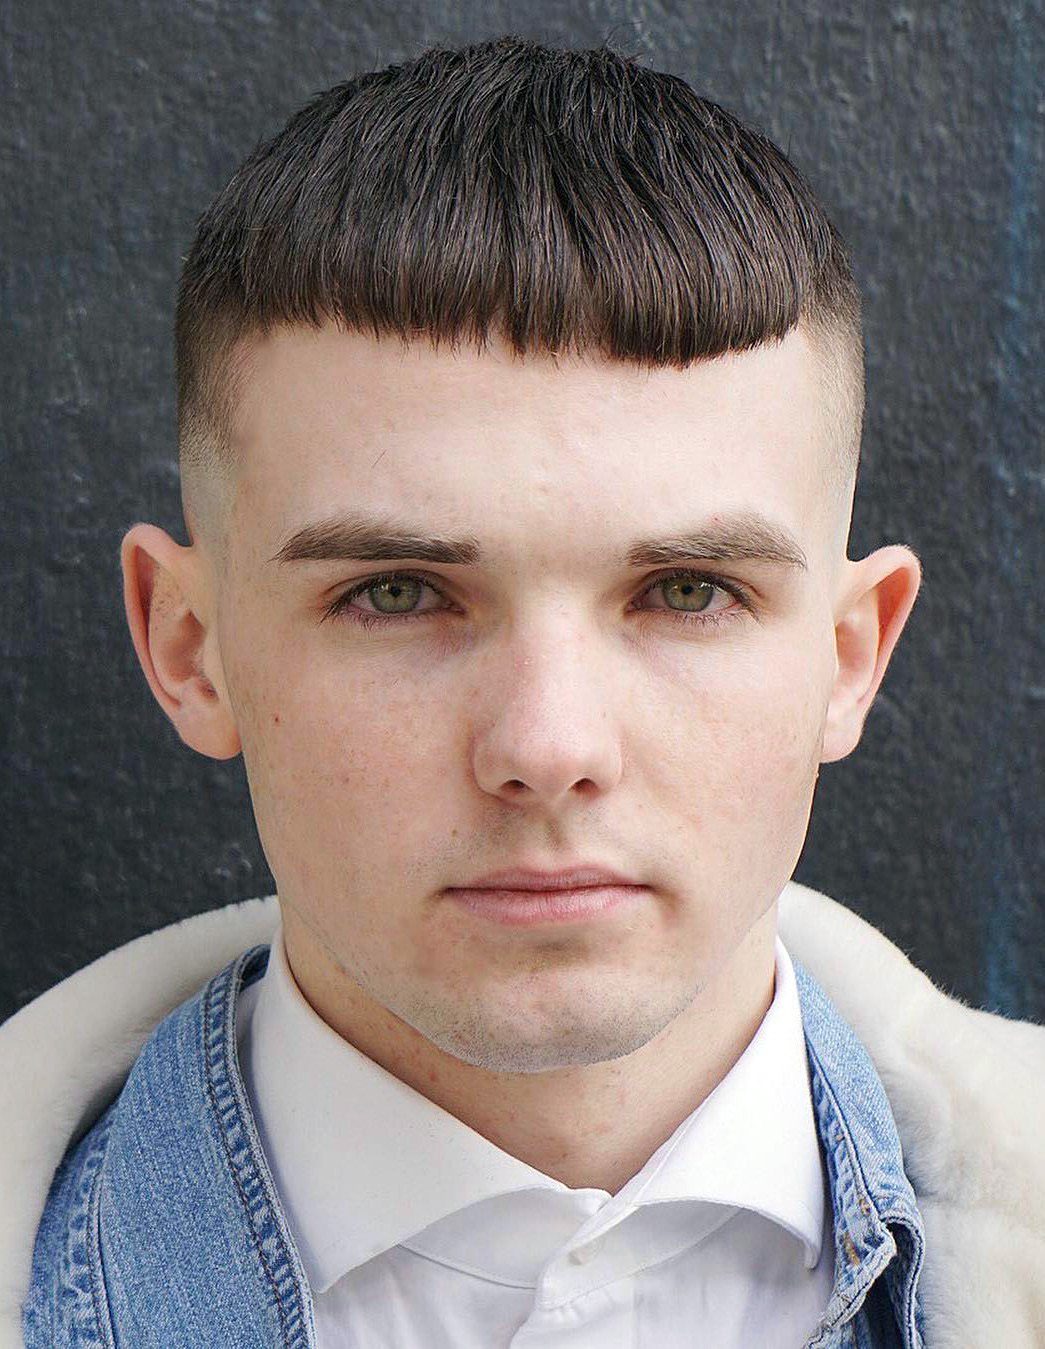 20 Selected Hairstyles For Men With Big Foreheads